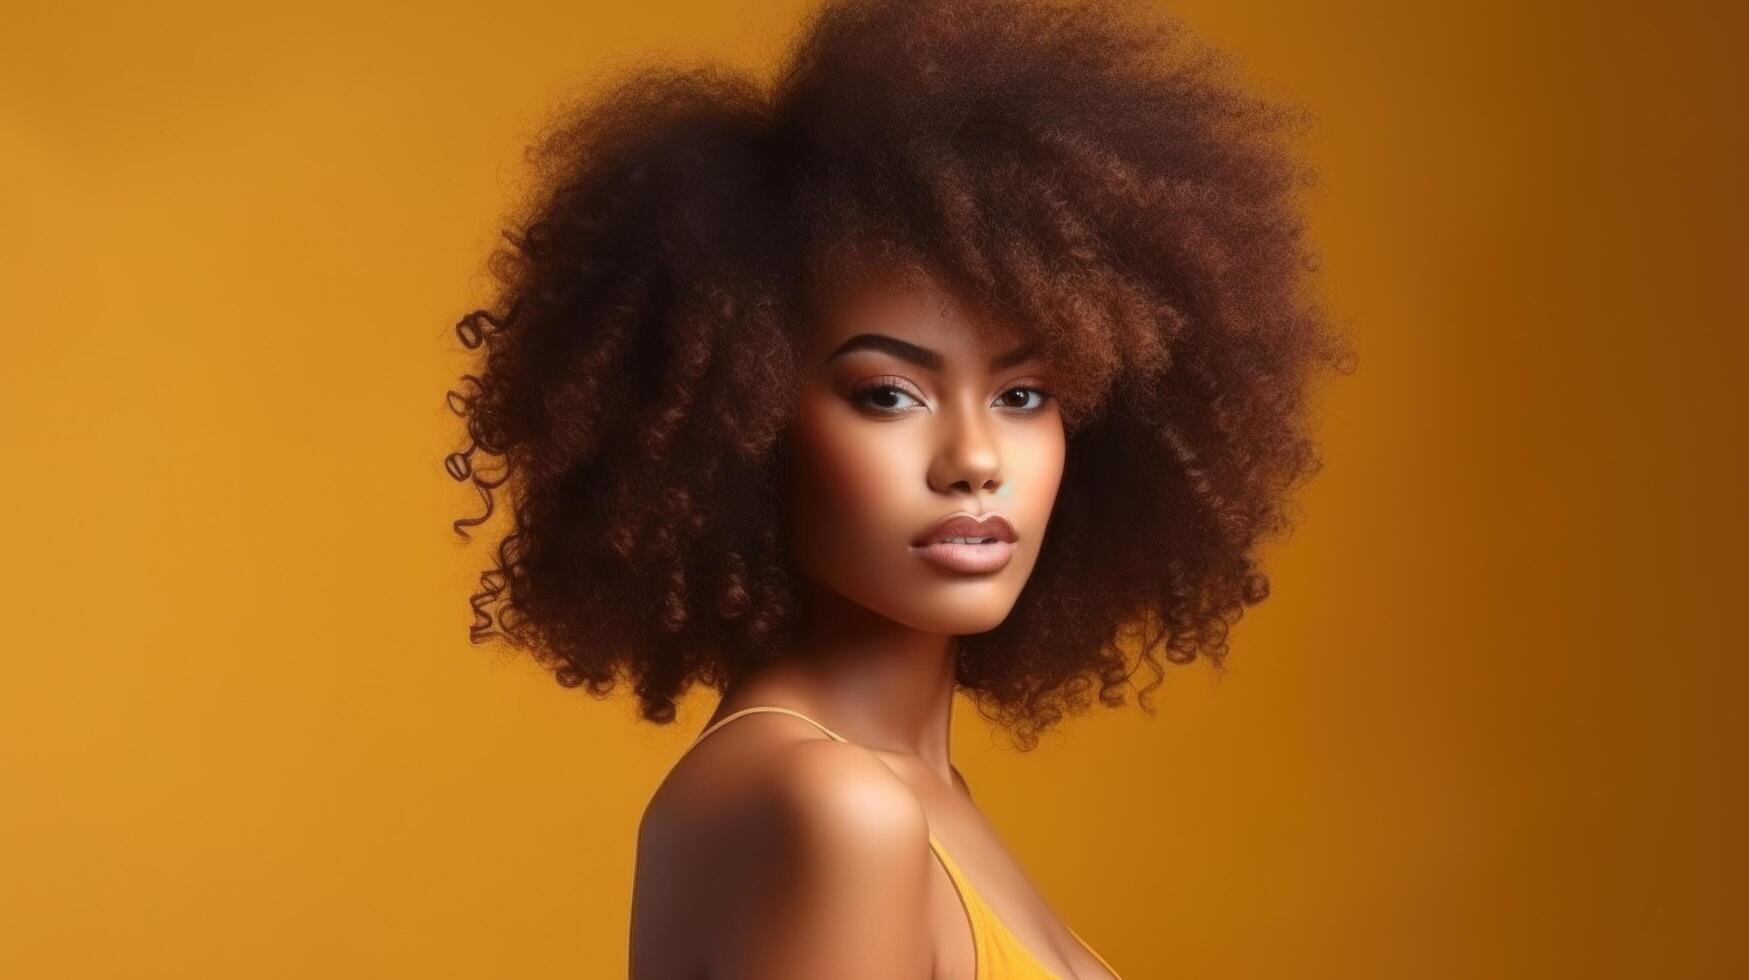 Beauty portrait of African American girl with afro hair. Illustration photo